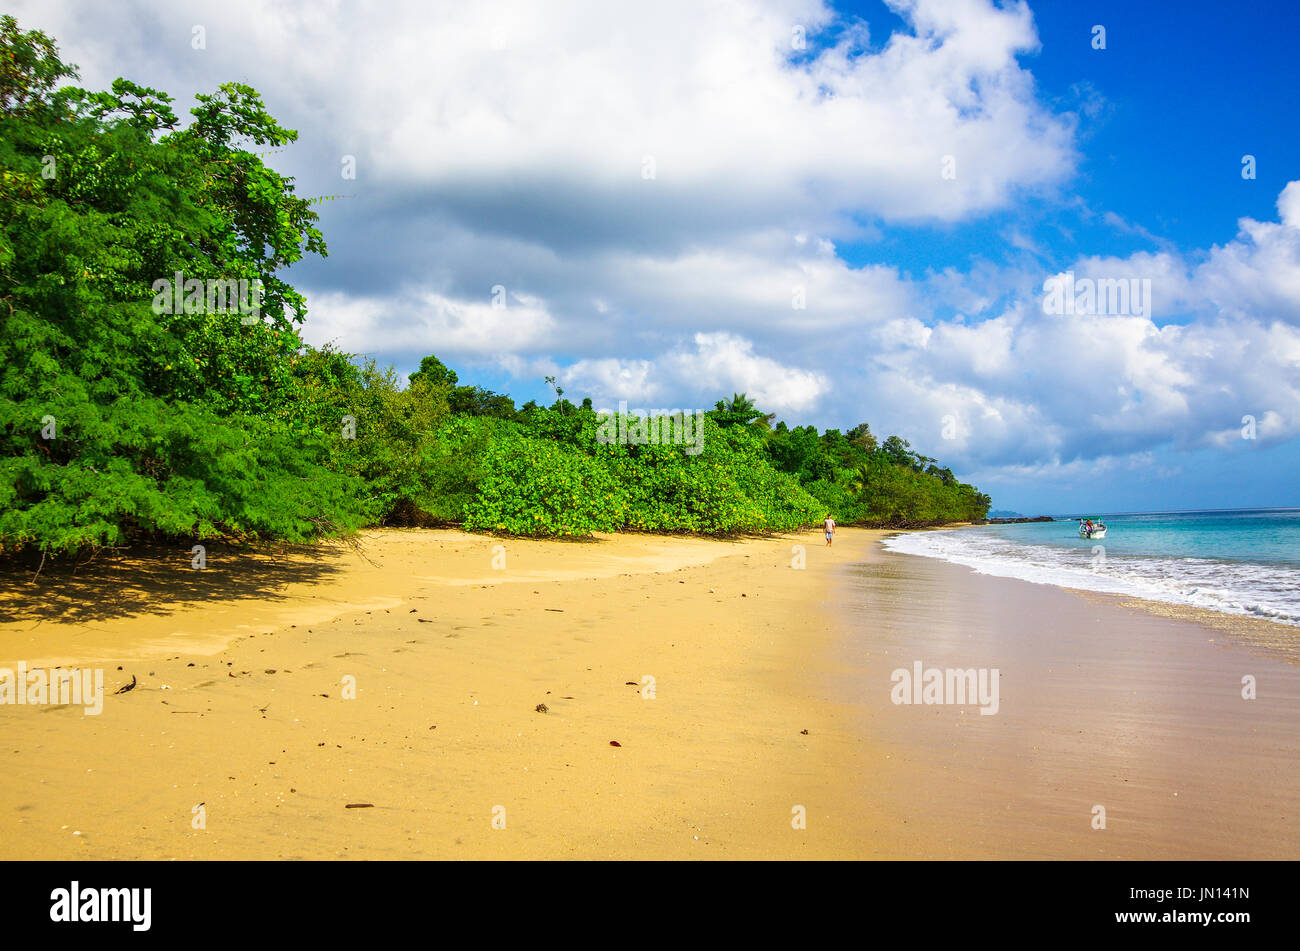 Beach scene images from coiba island national nature park in Panama Stock Photo